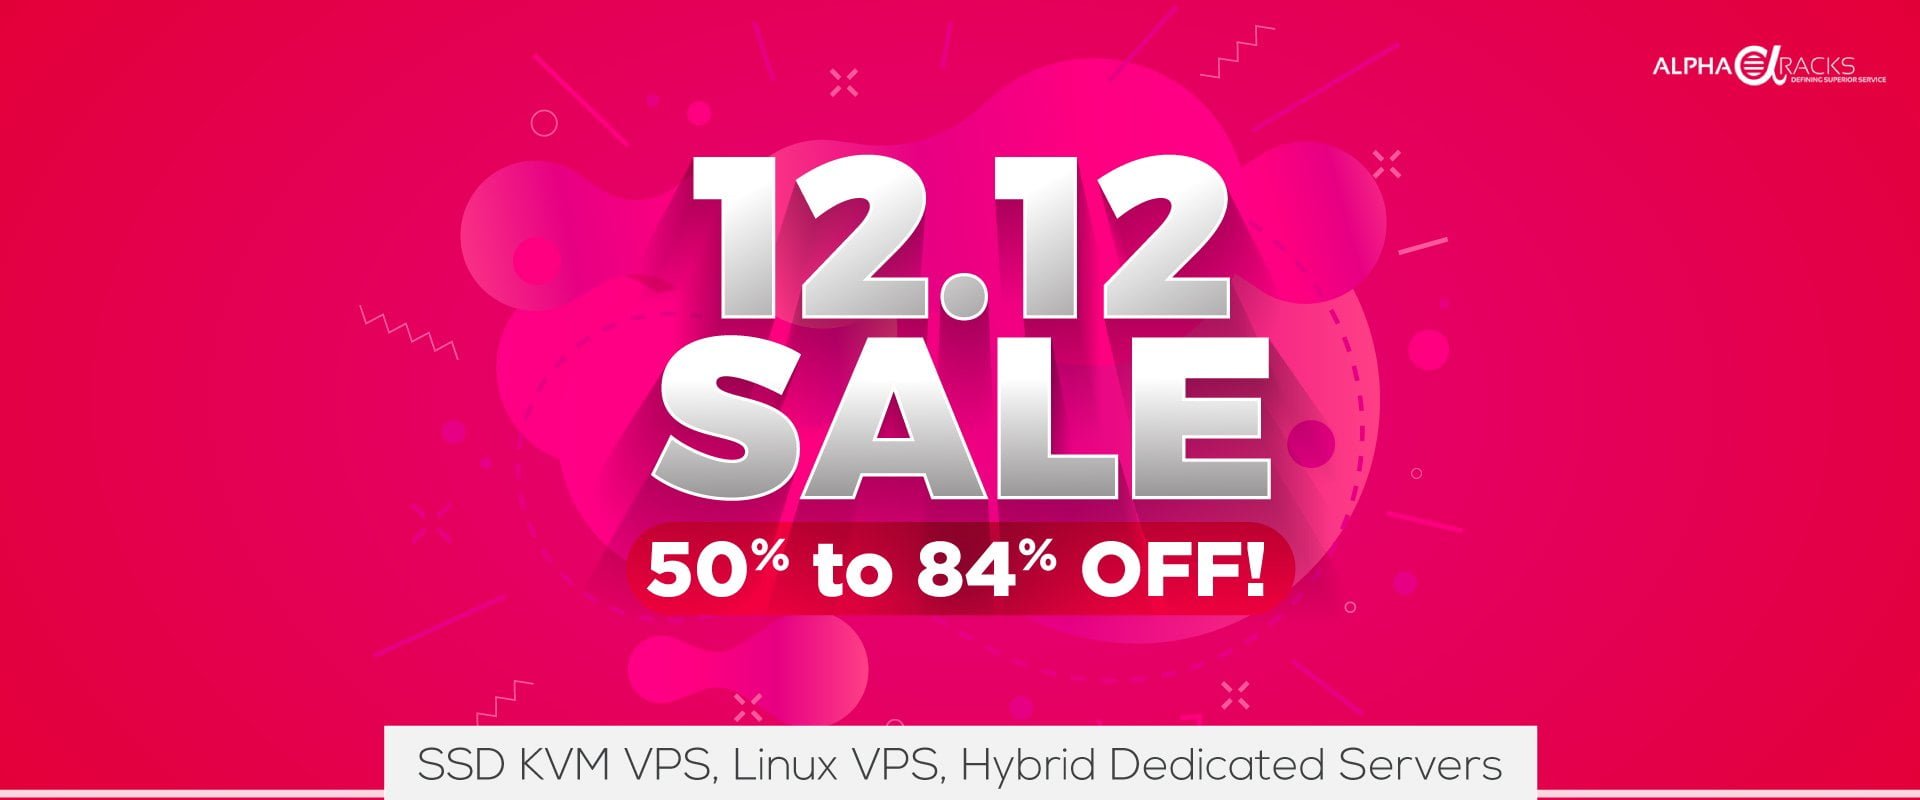 AlphaRacks VPS &#038; Dedicated Servers Sales &#8211; Up To 84% Off For Life